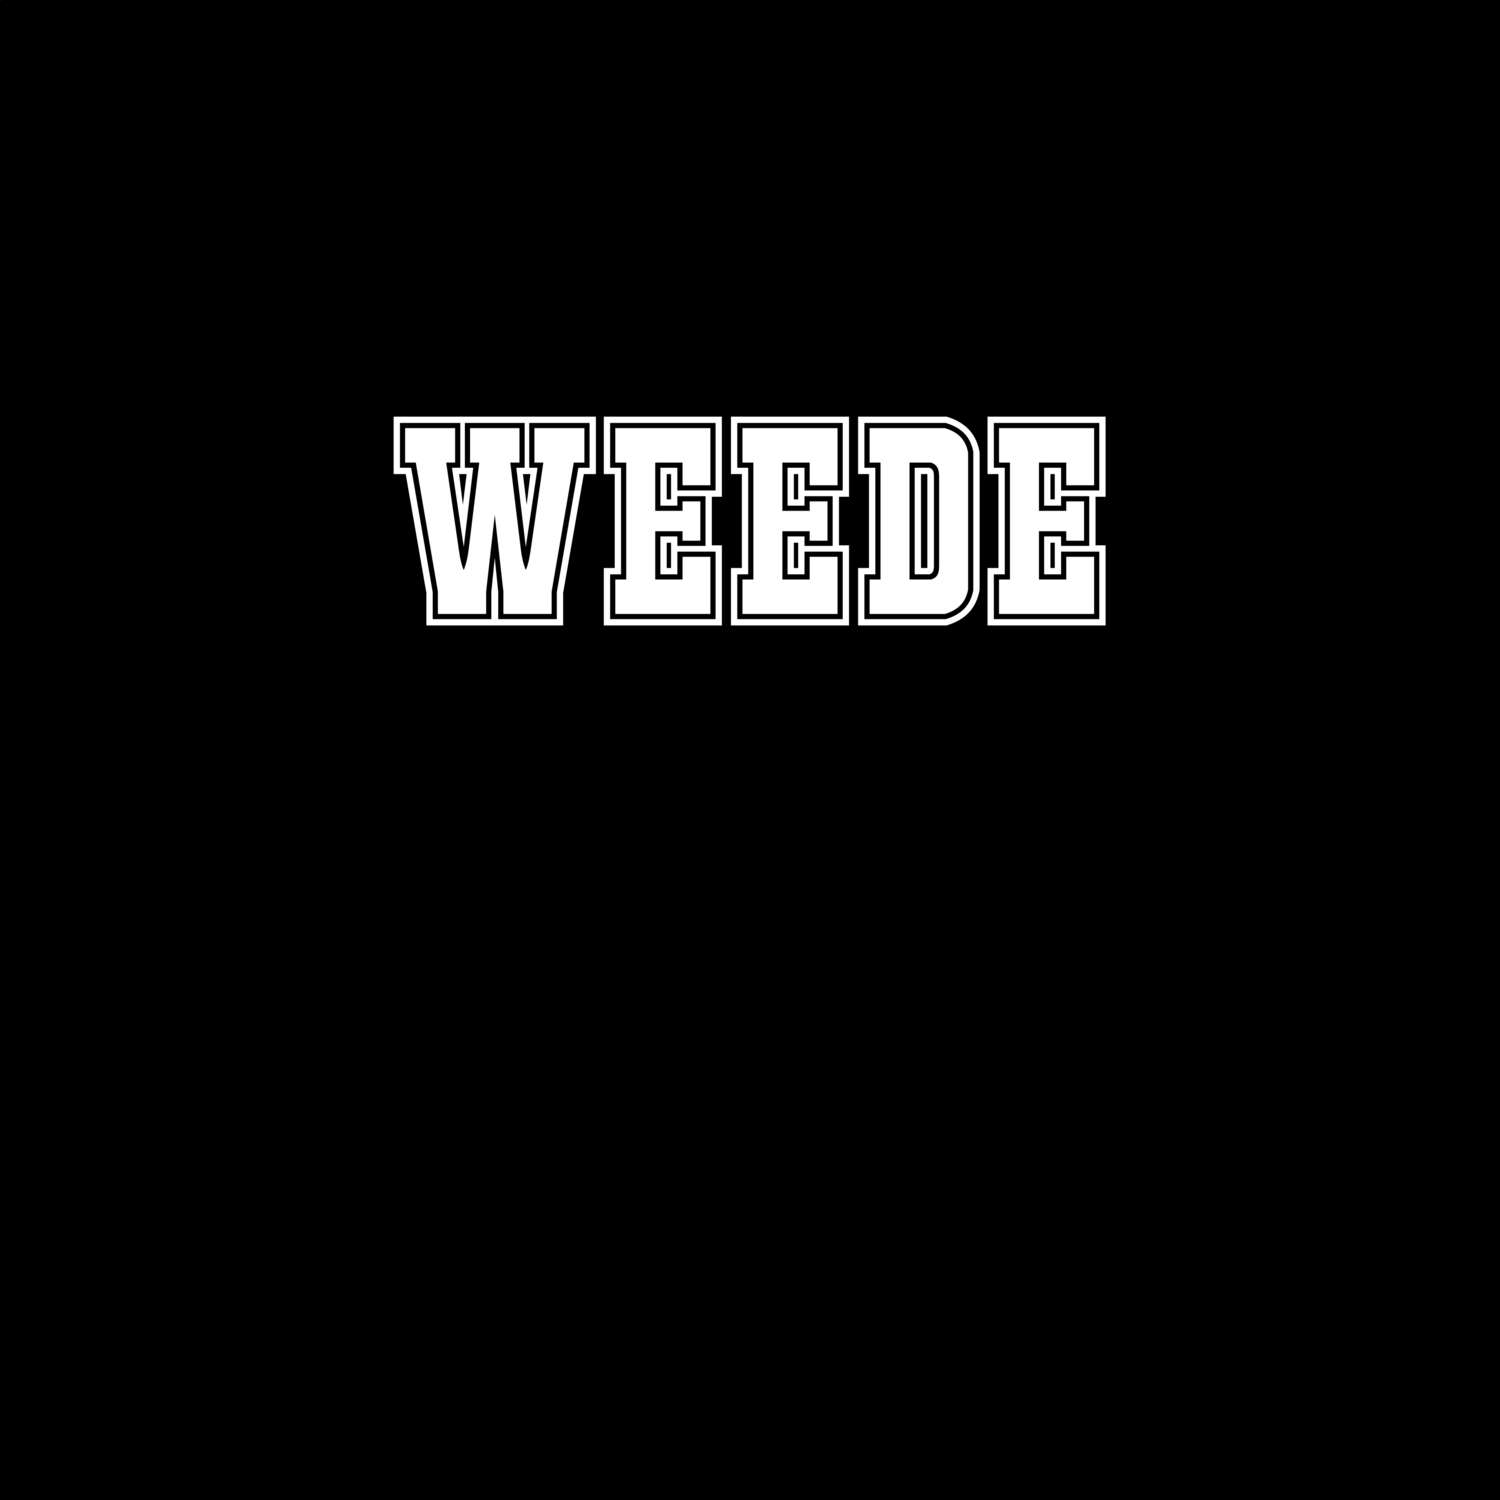 Weede T-Shirt »Classic«